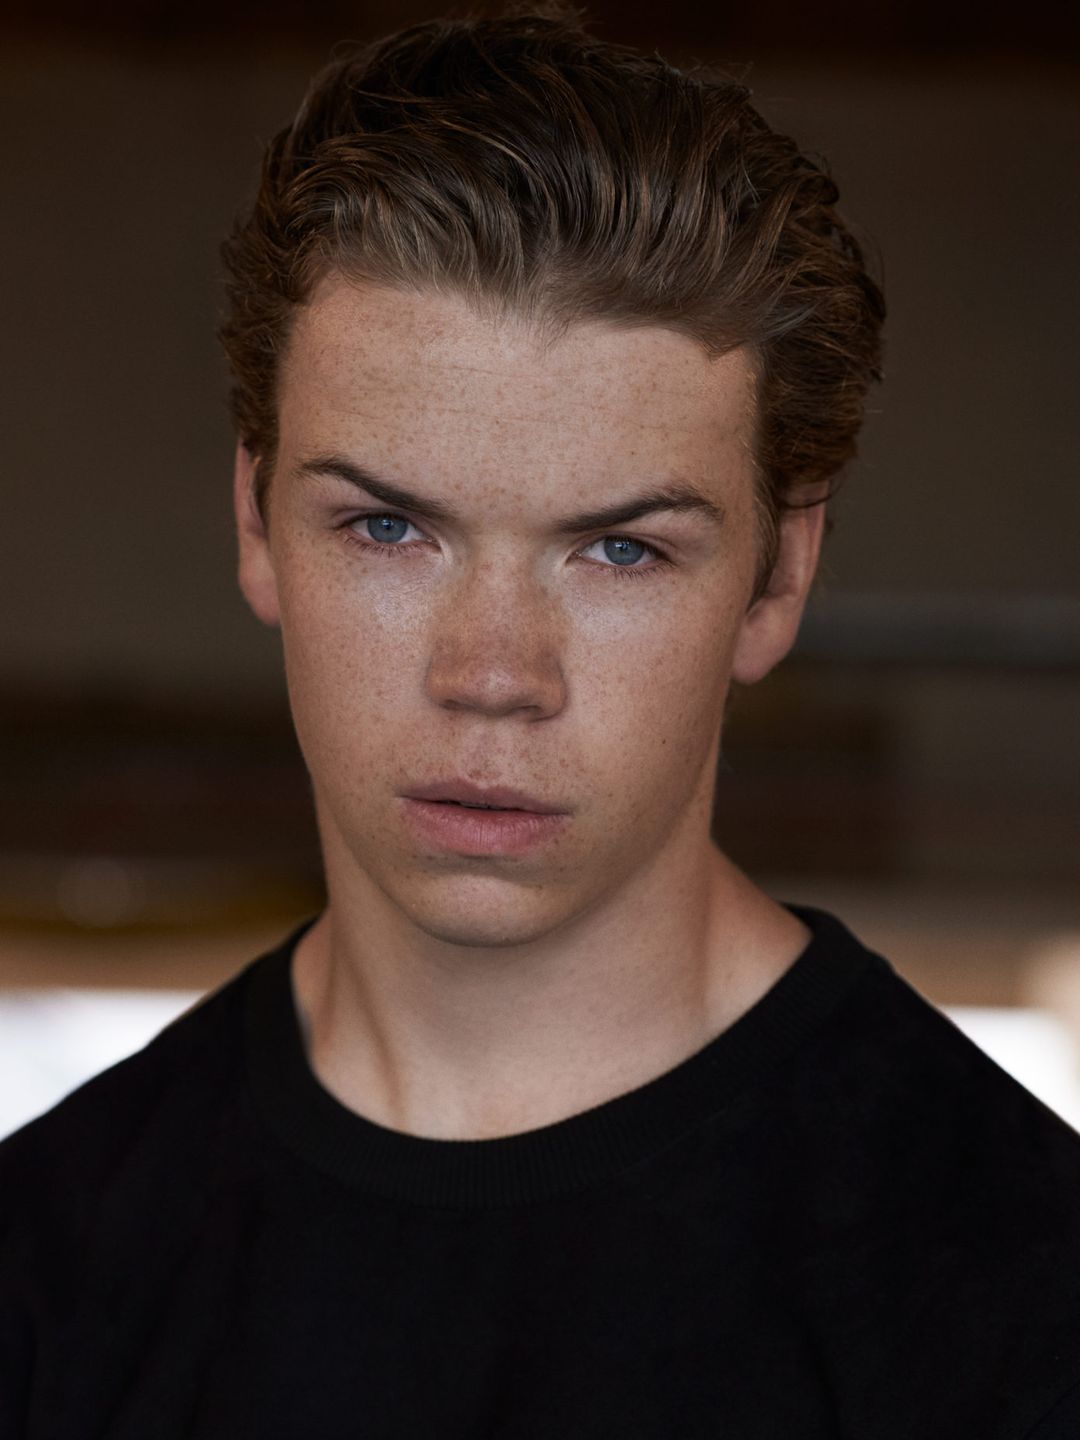 Will Poulter way to success